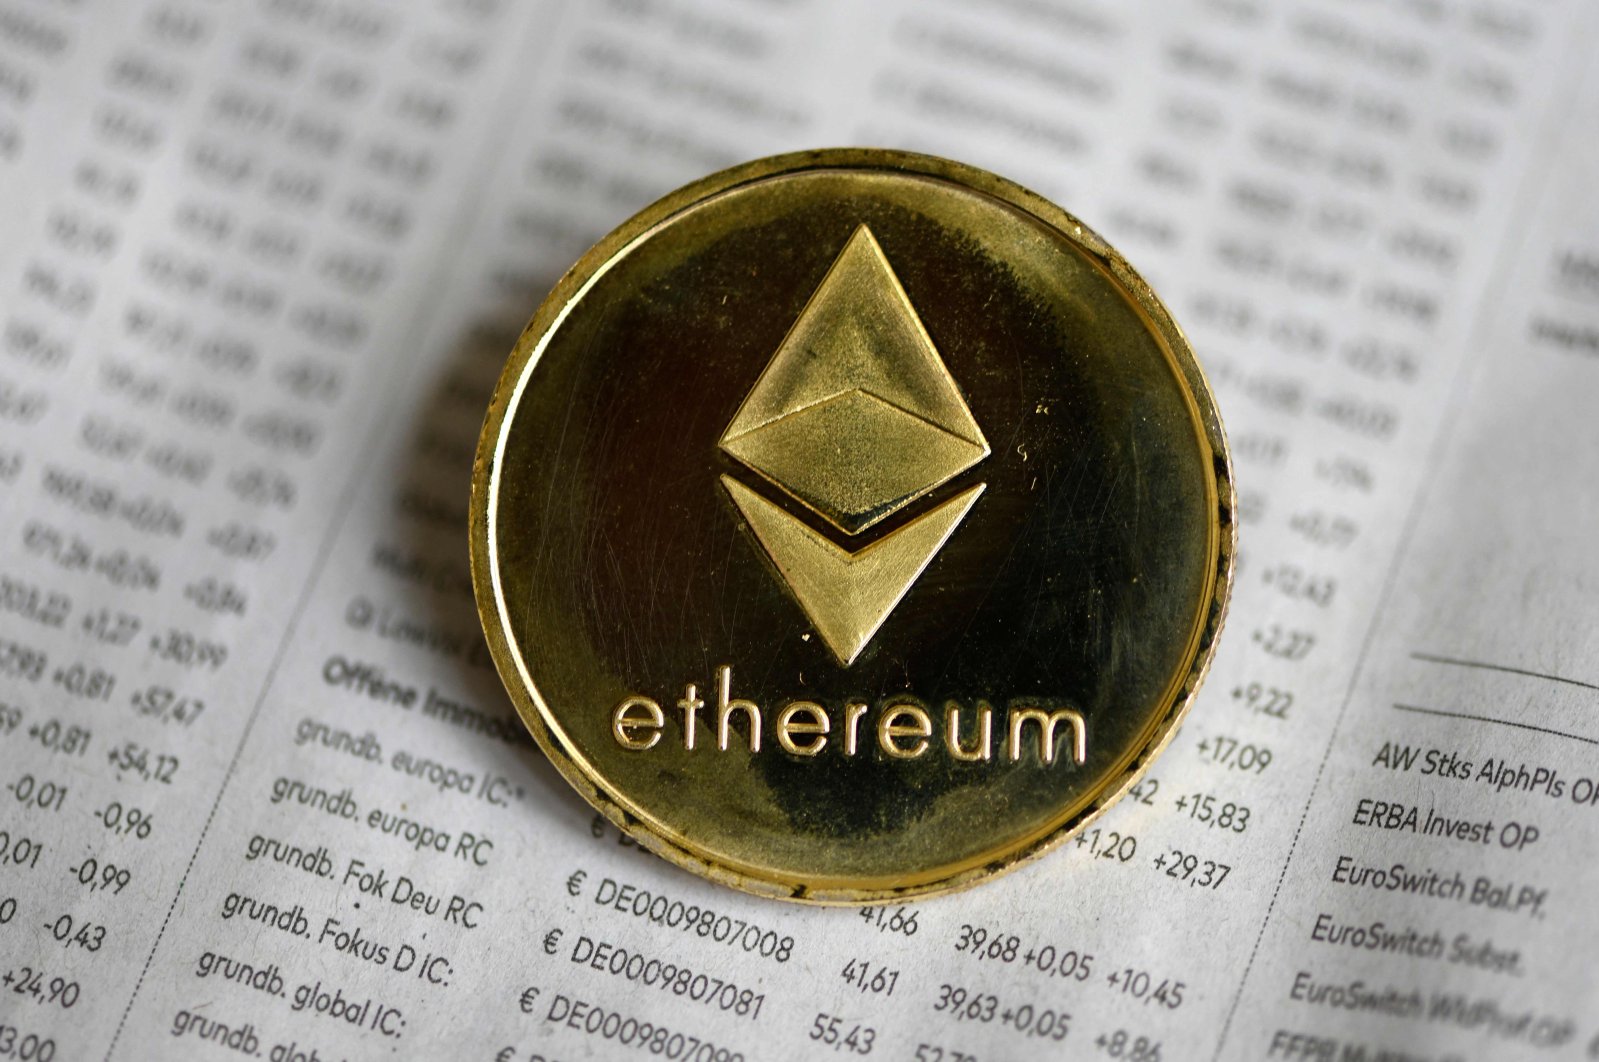 A physical imitation of the Ethereum cryptocurrency is seen in Dortmund, western Germany,  Jan. 27, 2020. (AFP Photo)